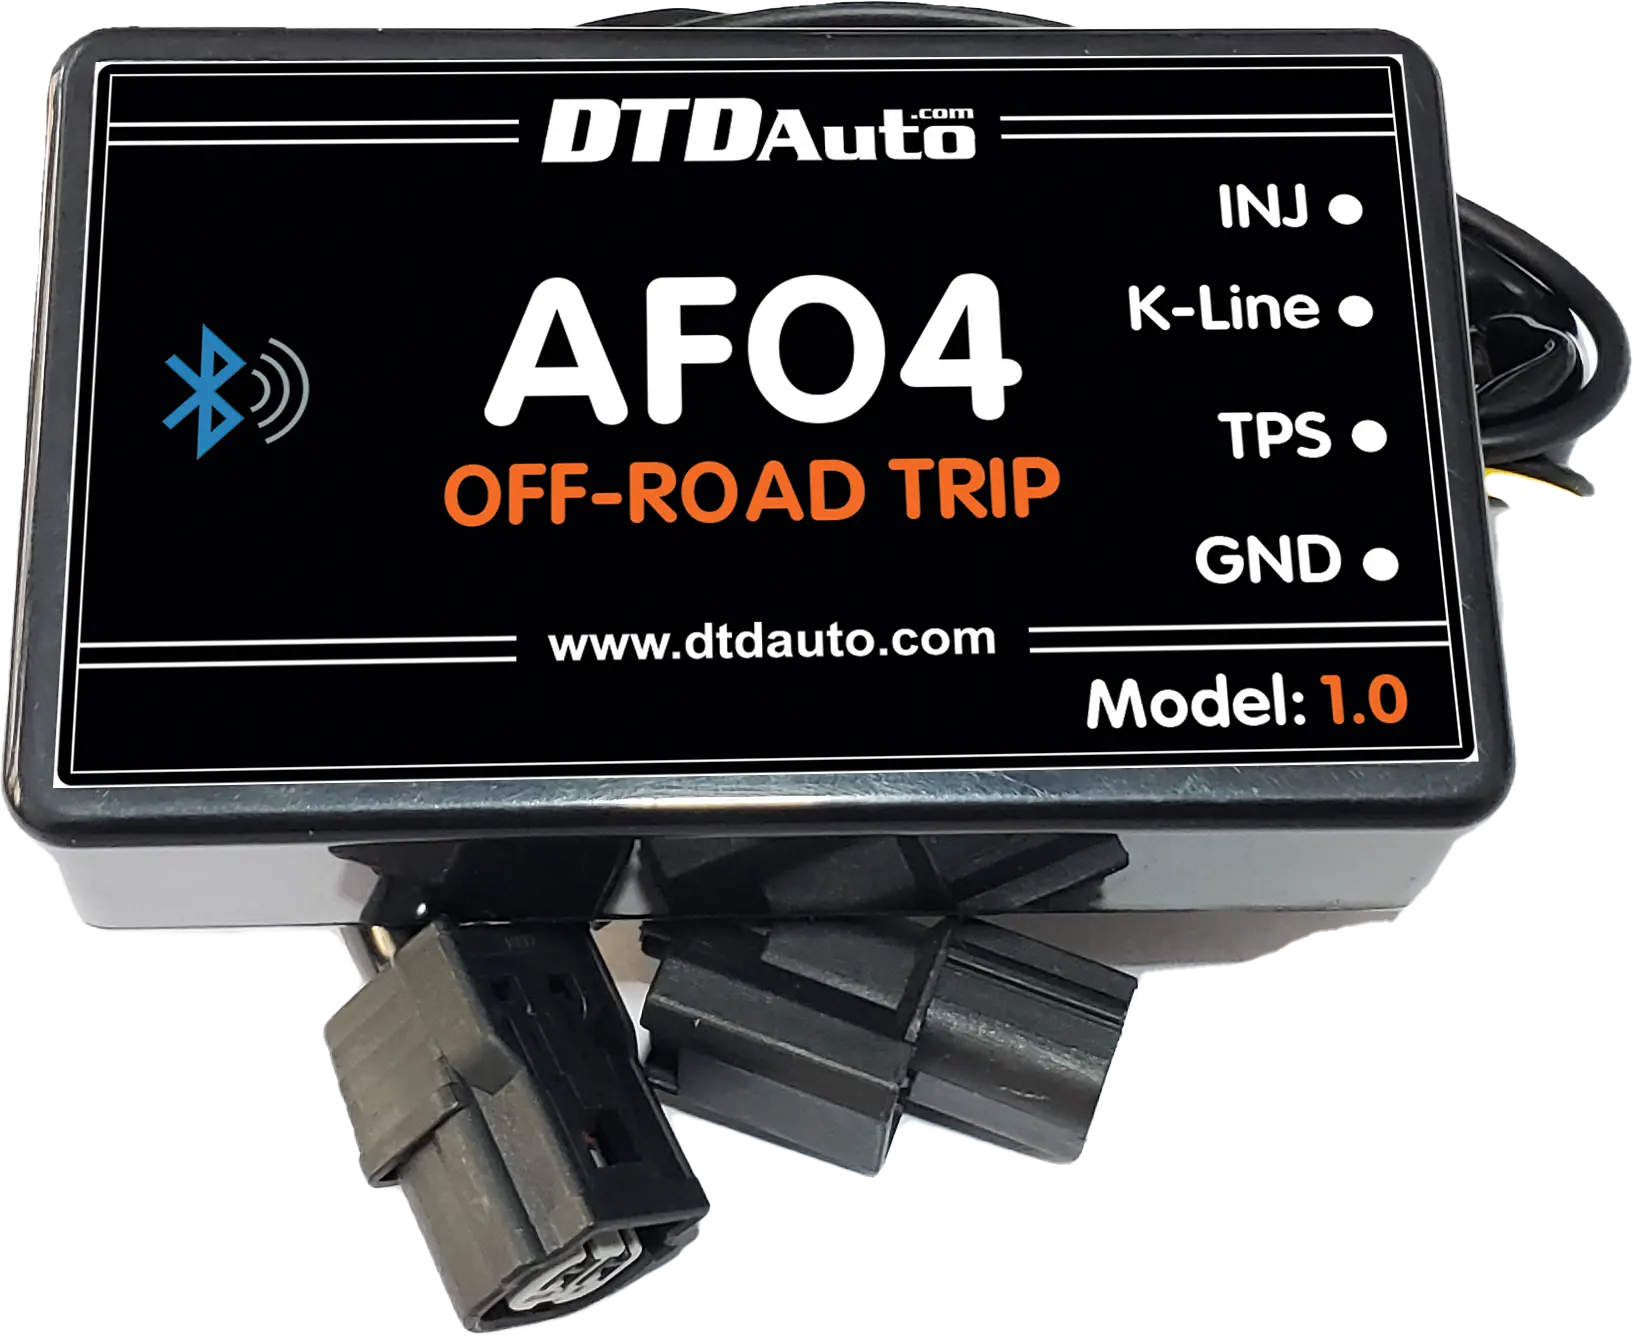 DTDAuto AFO4 TRIP - High Quality Accessories Active Control Online Instant Engine Power Right No Need to REMAP